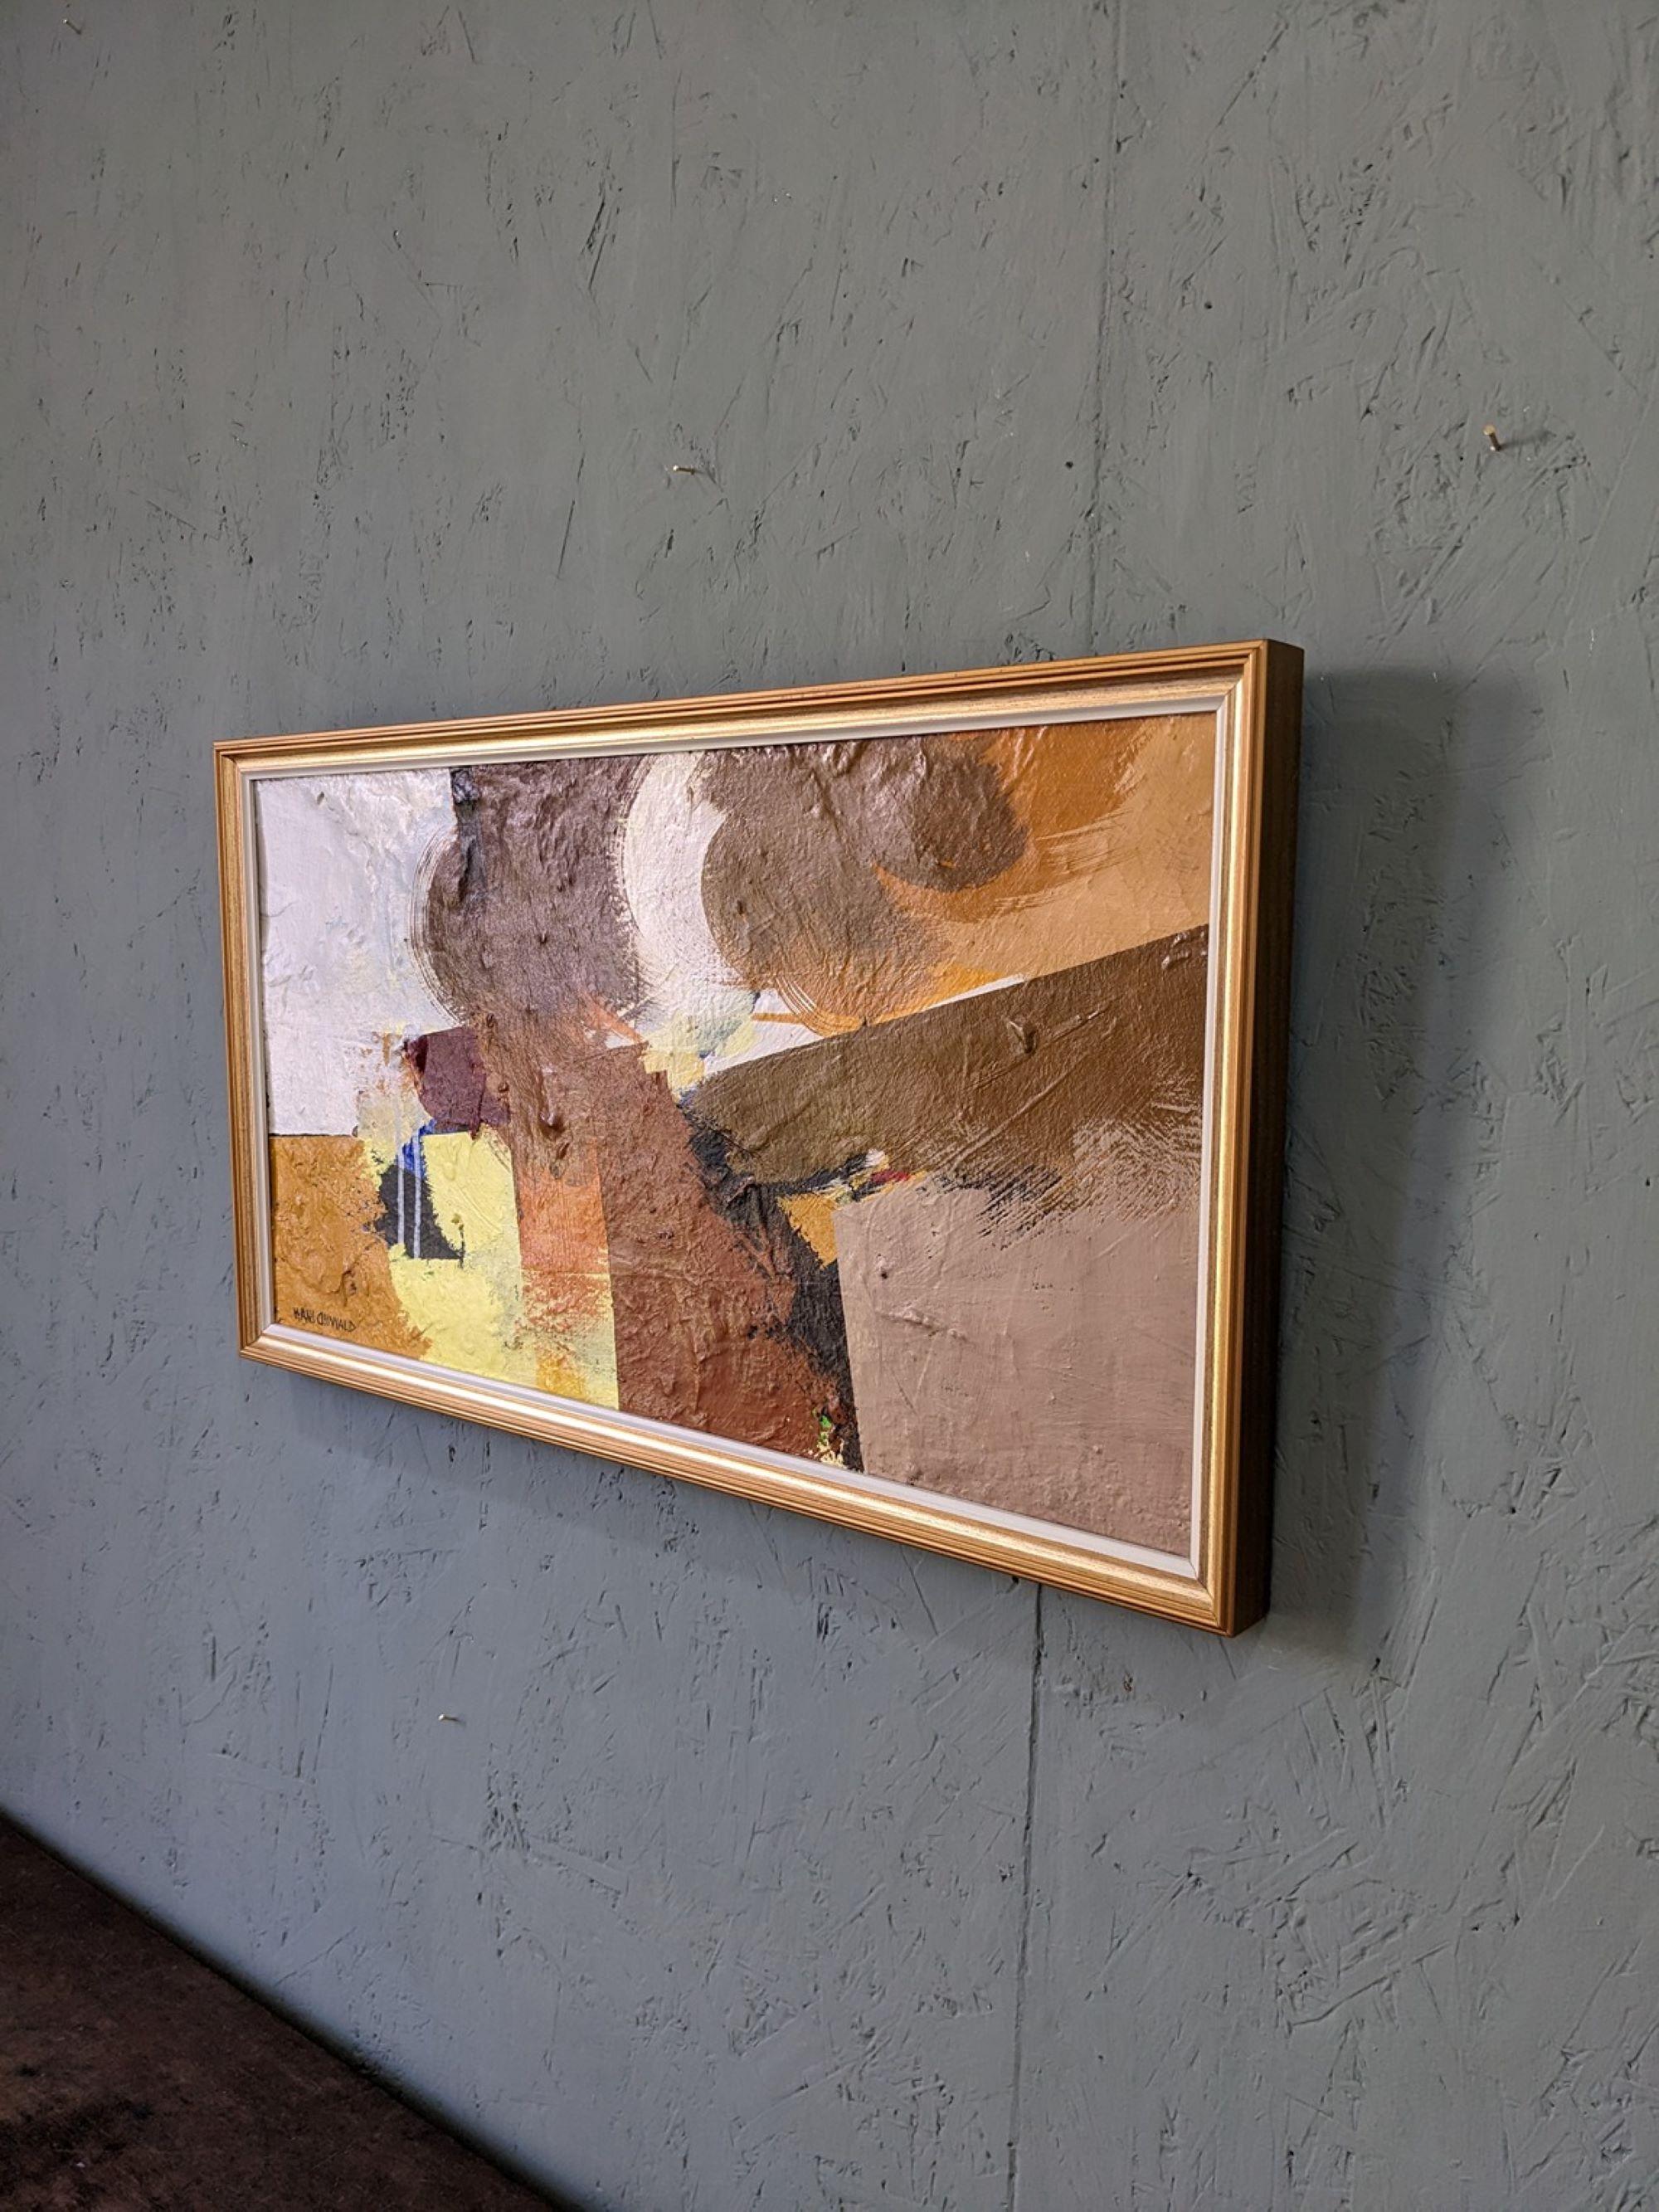 AUTUMN RHAPSODY
Oil on board
Size: 32 x 58.5 cm (including frame)

A rich and captivating mid-century abstract painting, executed in oil onto canvas by Swedish painter Hans Osswald (1919-1983), whose works have been exhibited at the National Museum